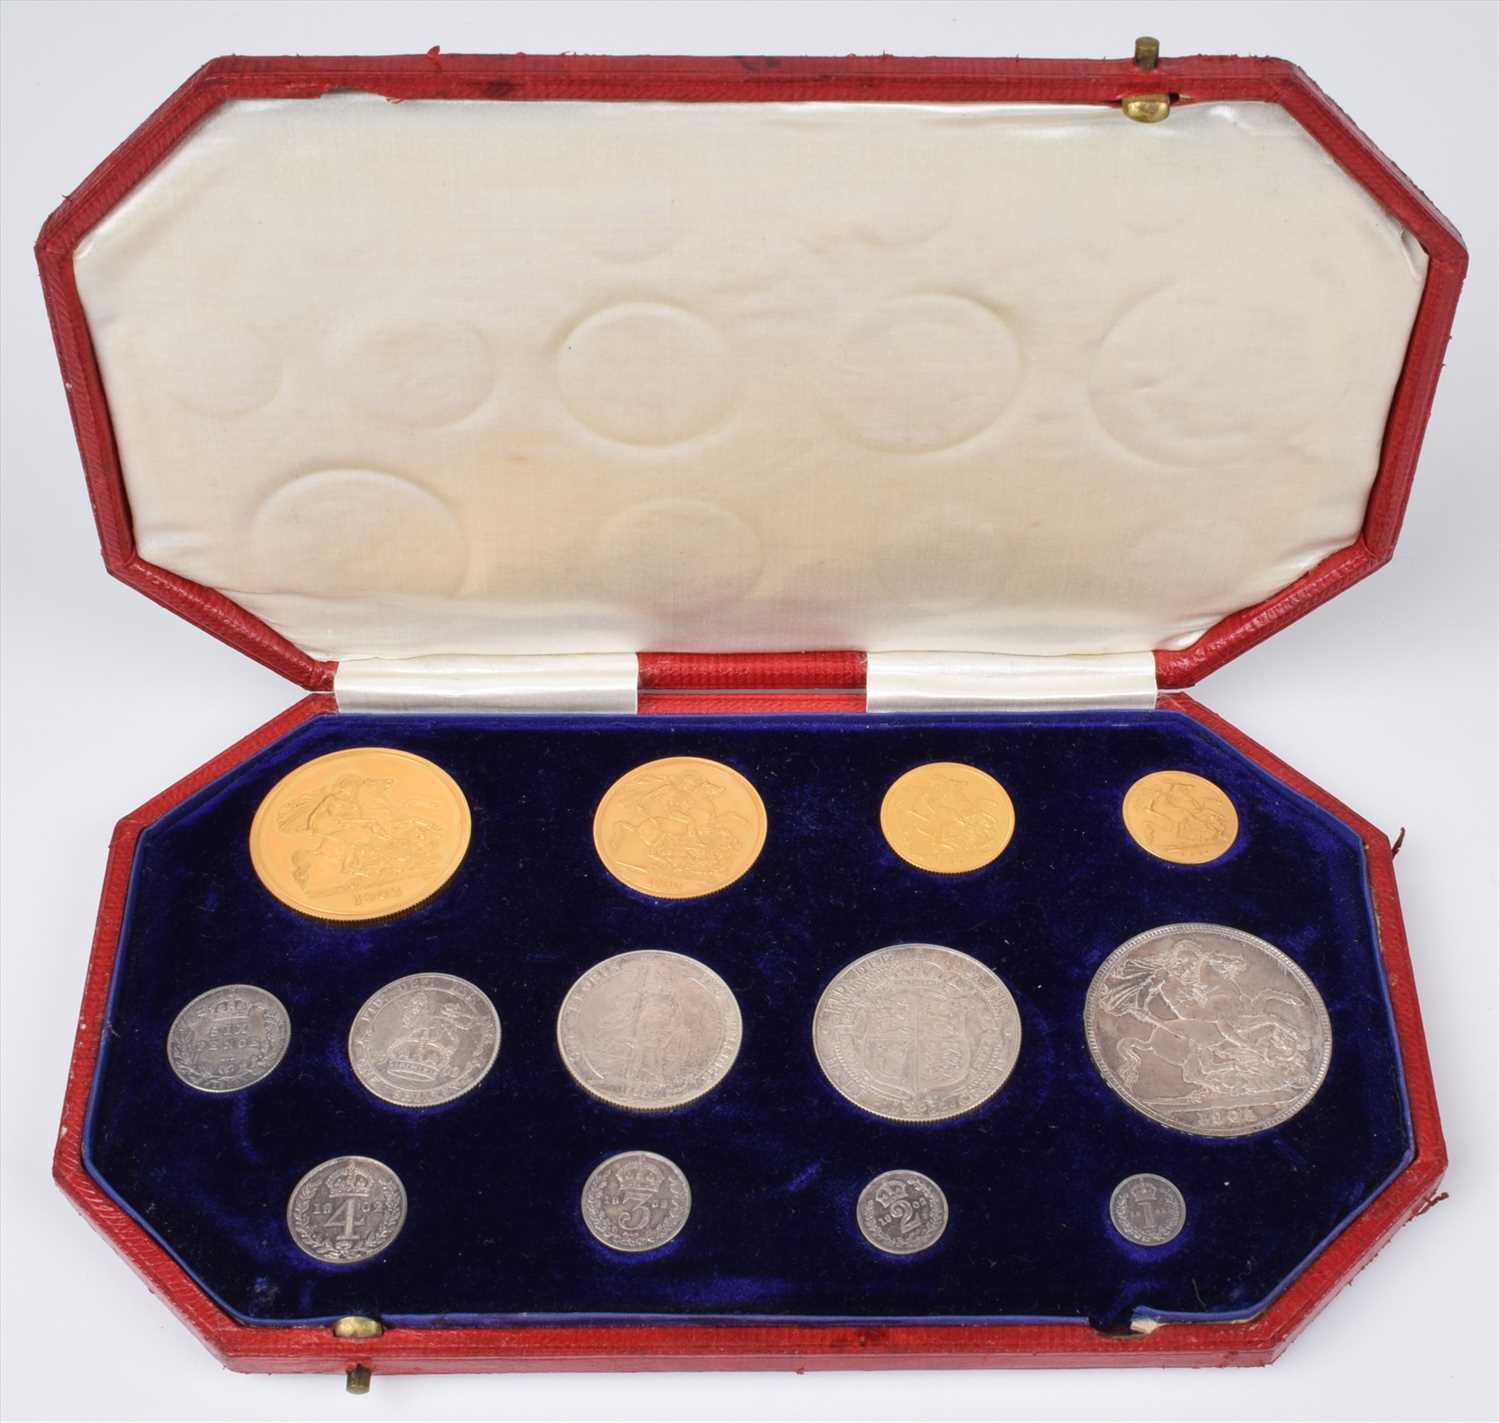 Lot 165 - Edward VII 1902 Coronation 13 coin proof specimen set in red leather case.